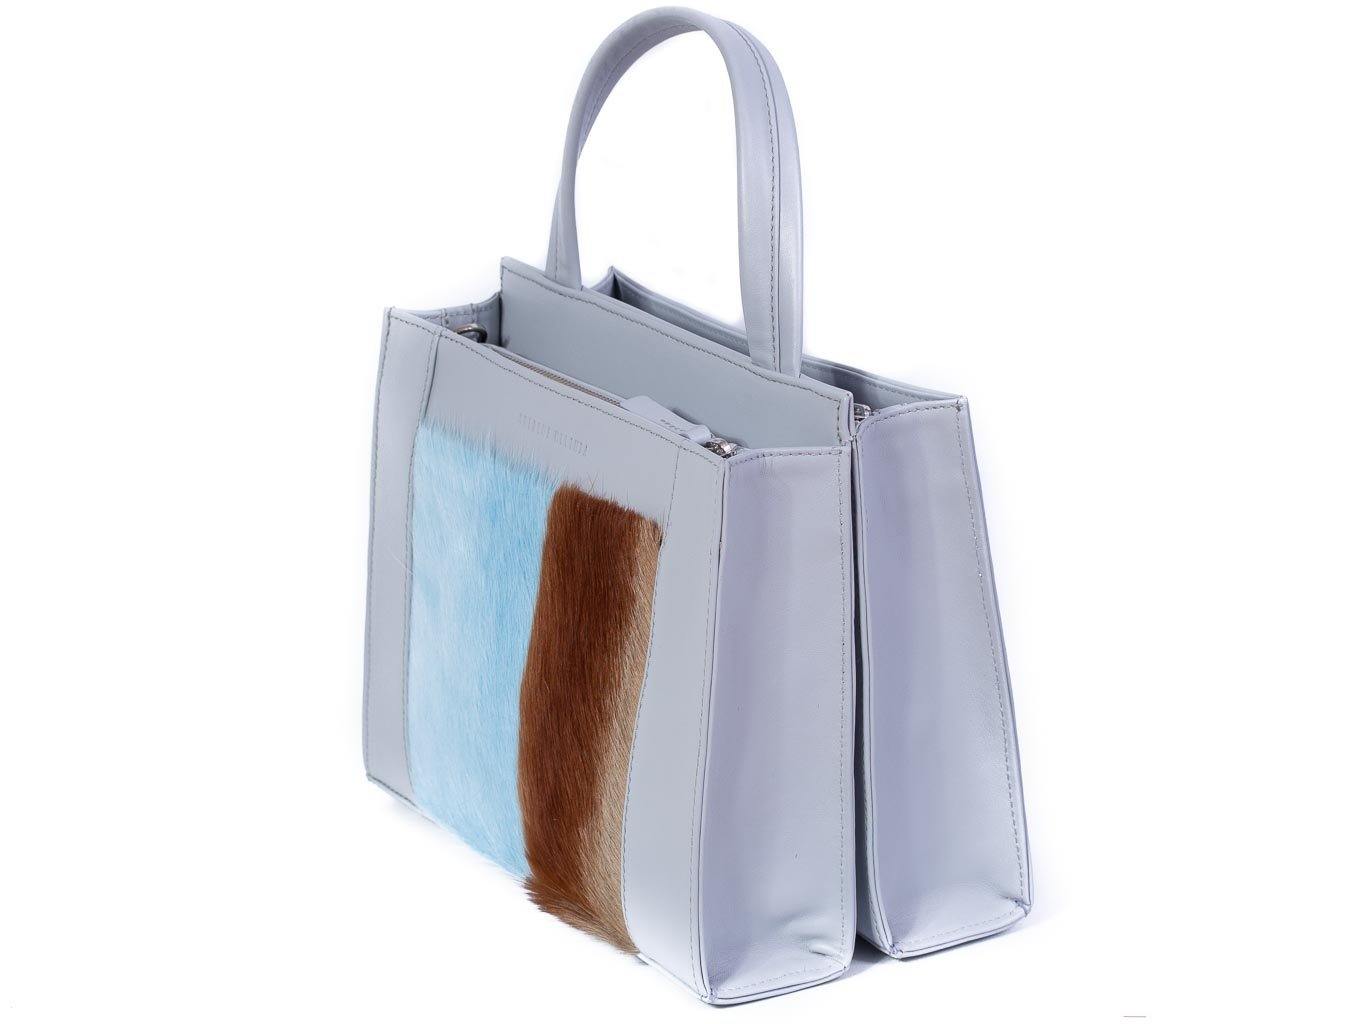 Top Handle Springbok Handbag in Baby Blue with a stripe feature by Sherene Melinda front